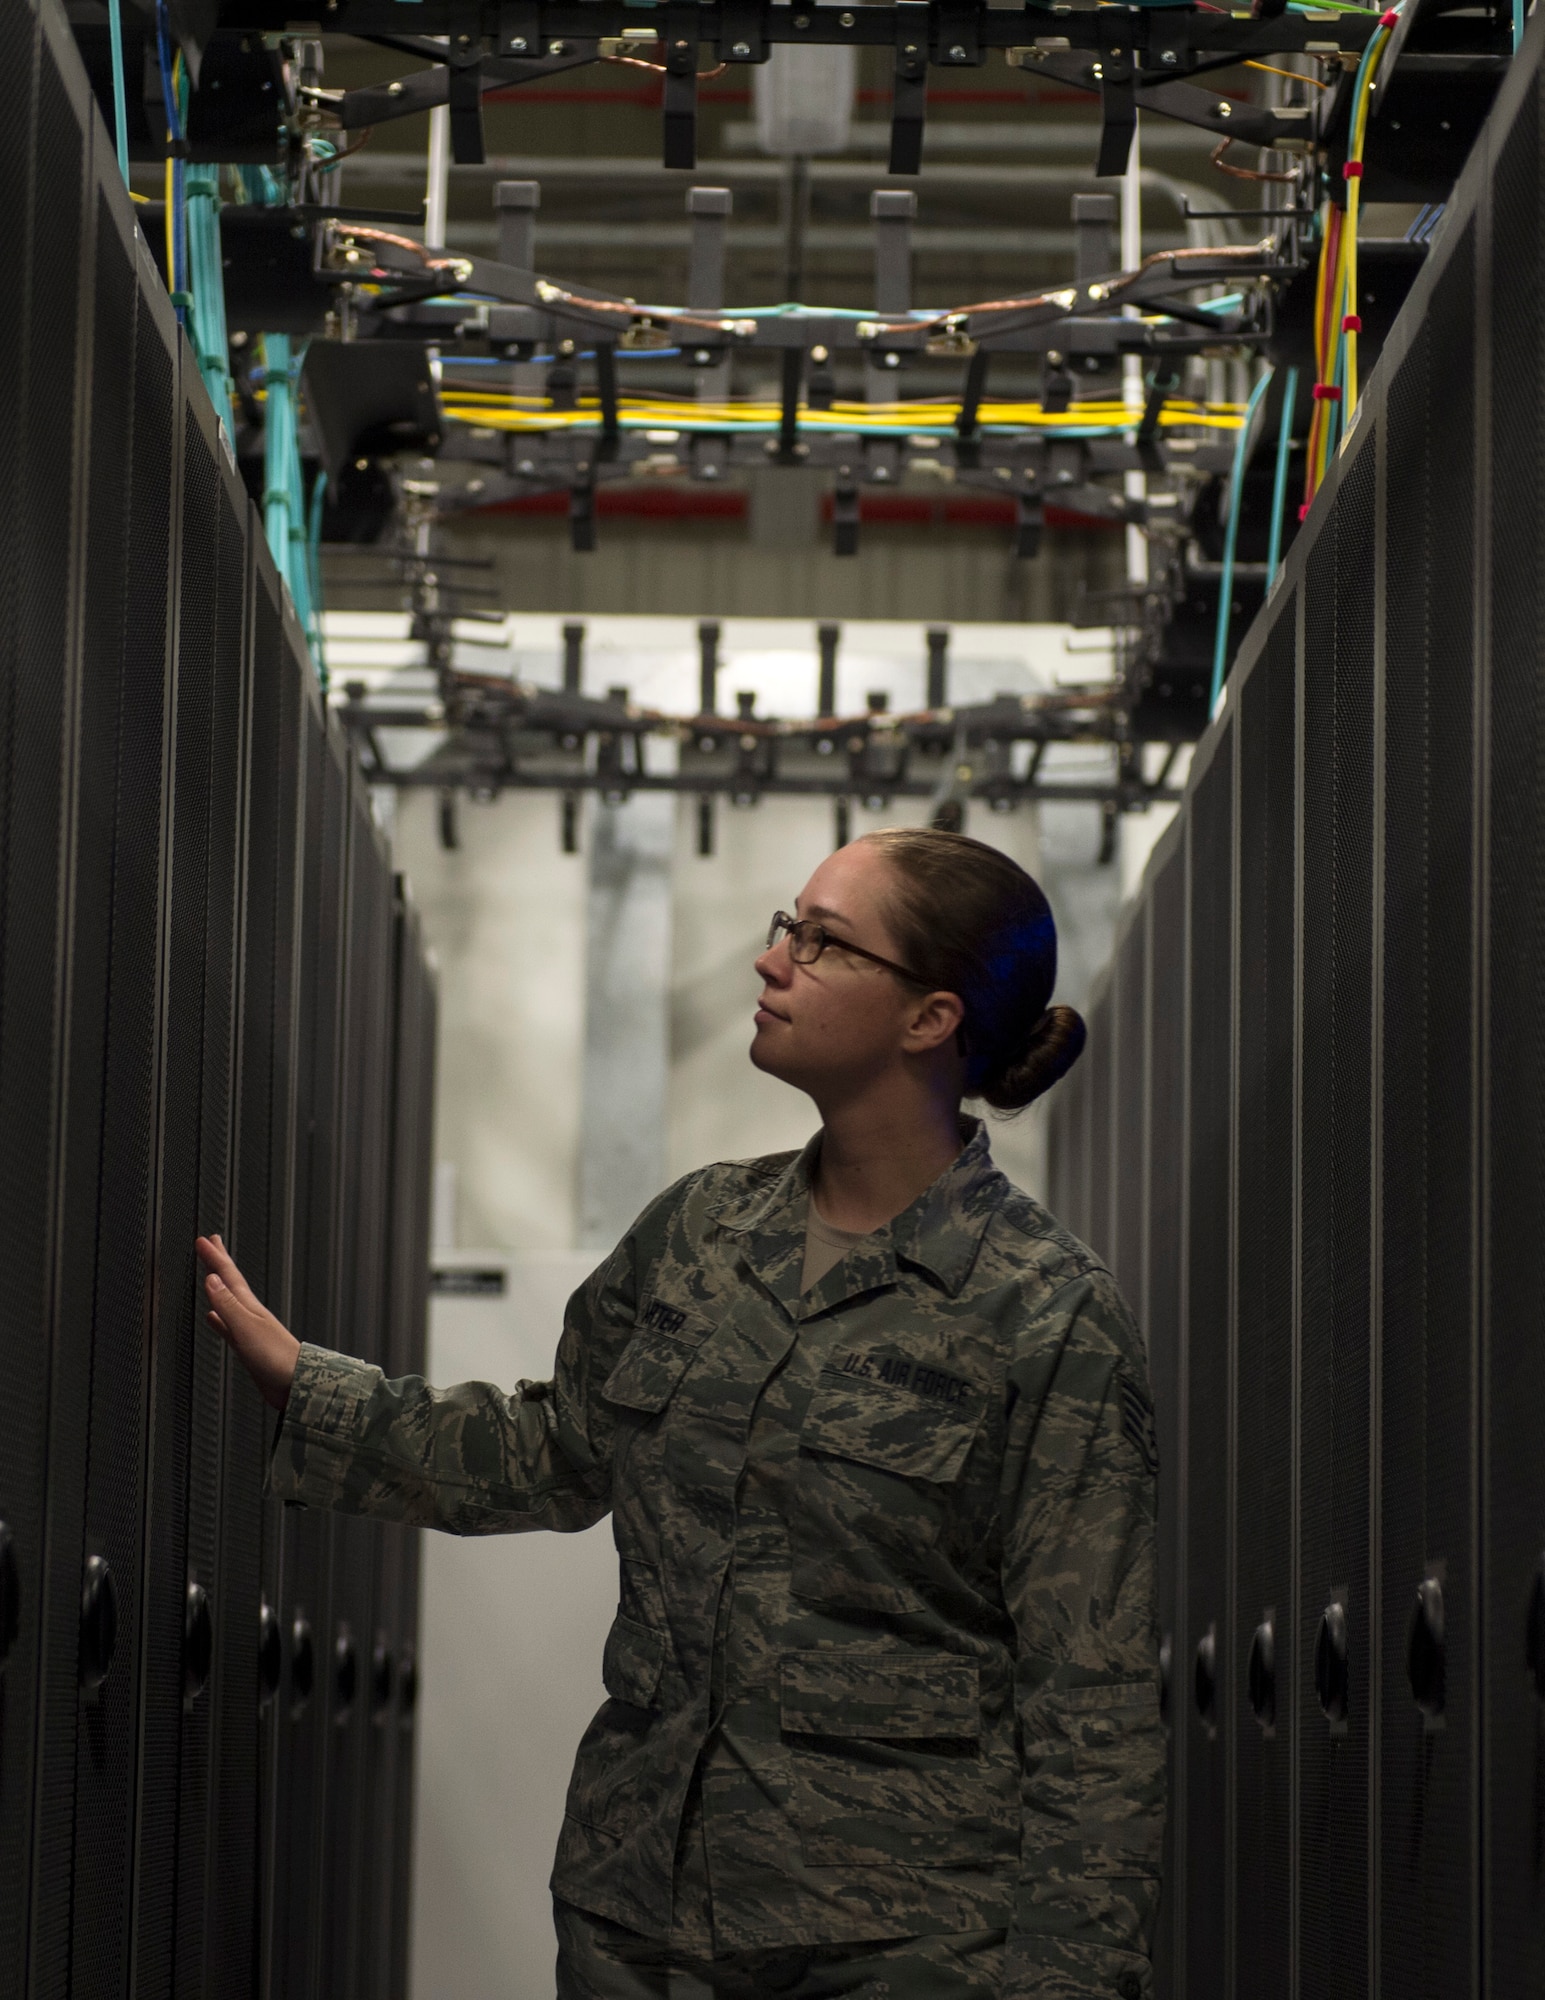 U.S. Air Force Staff Sgt. Shelby Carter, 379th Expeditionary Communication Squadron, checks the network servers for signs of problems at Al Udeid Air Base, Qatar, July 14, 2017. Carter is part of a team of Airmen which are responsible for installing and supporting all network servers by ensures they are operational and secure from outside intrusion. (U.S. Air Force photo by Tech. Sgt. Amy M. Lovgren)